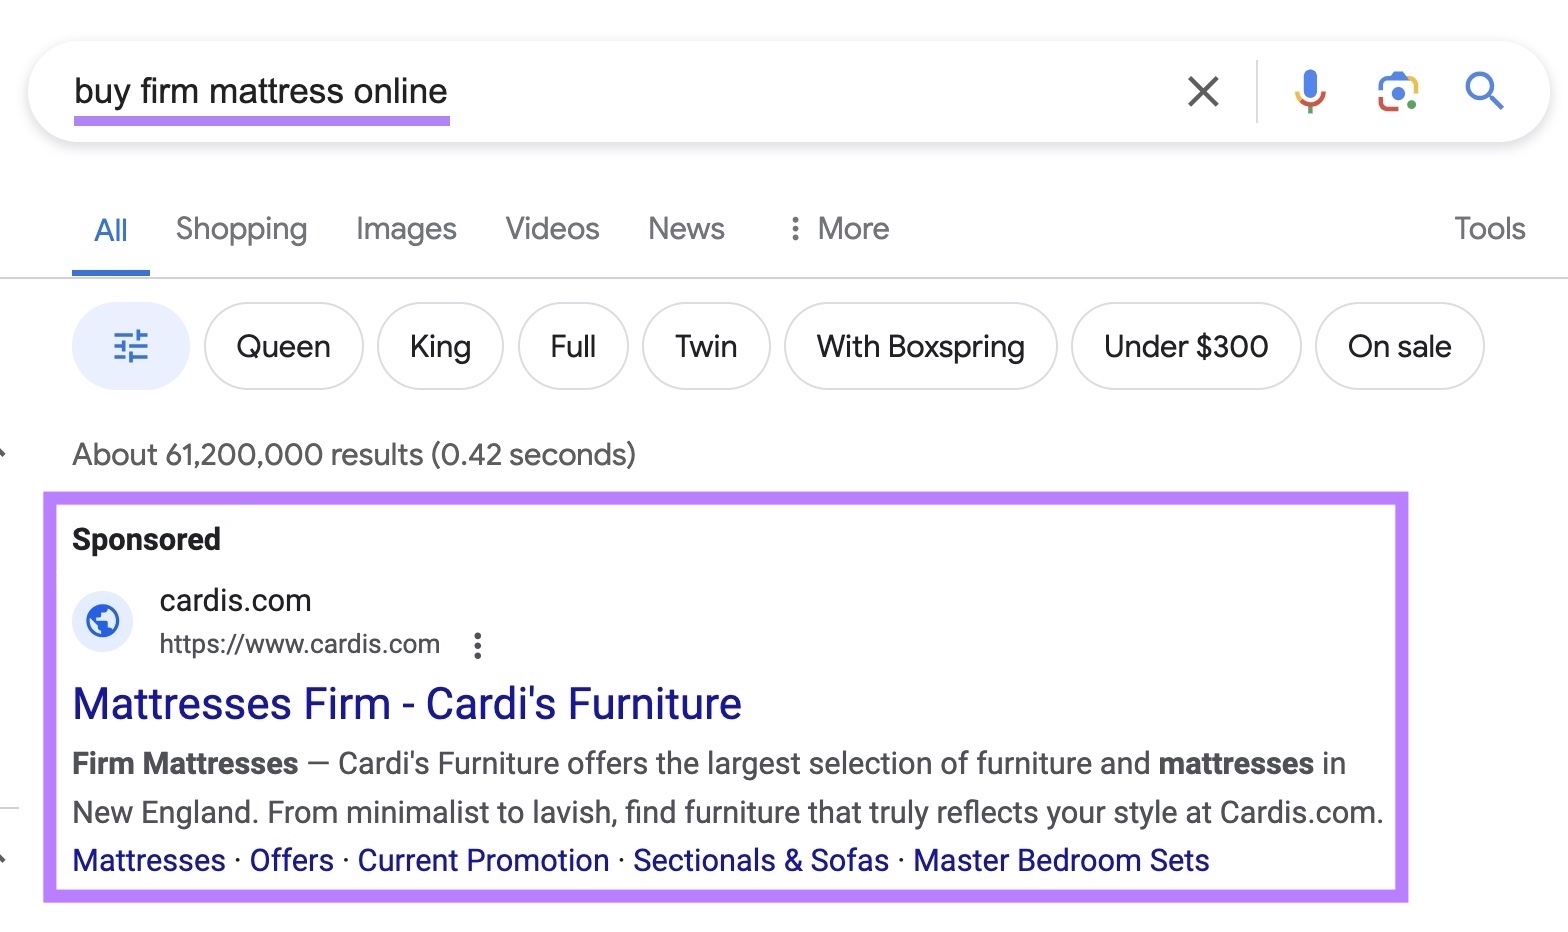 Google hunt  advertisement  appearing for “buy steadfast  mattress online" query